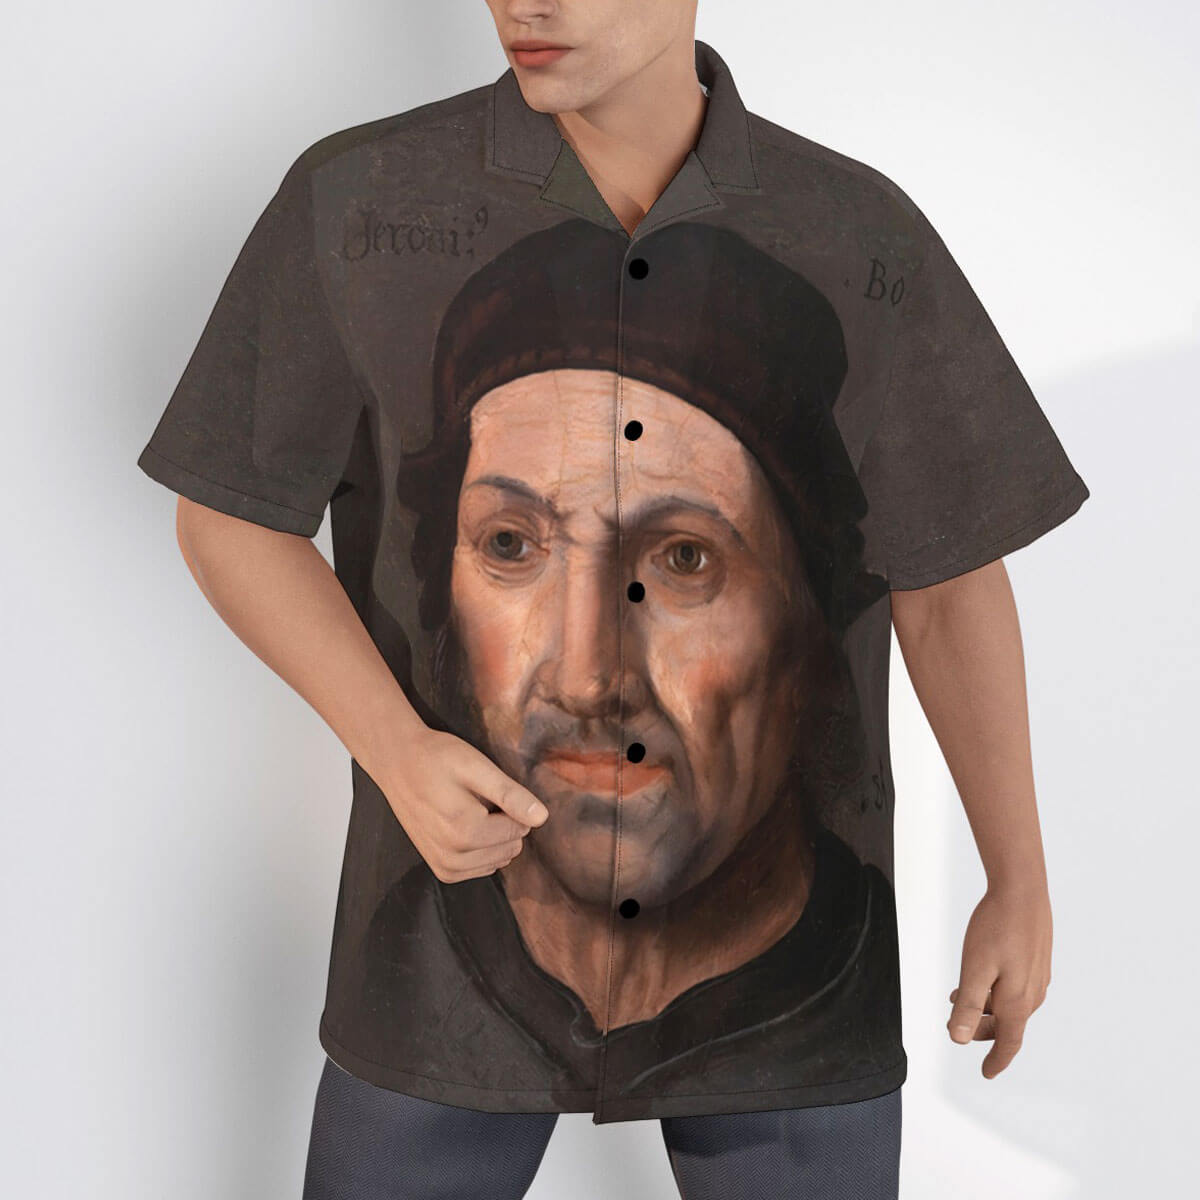 Bosch Portrait shirt paired with casual wear